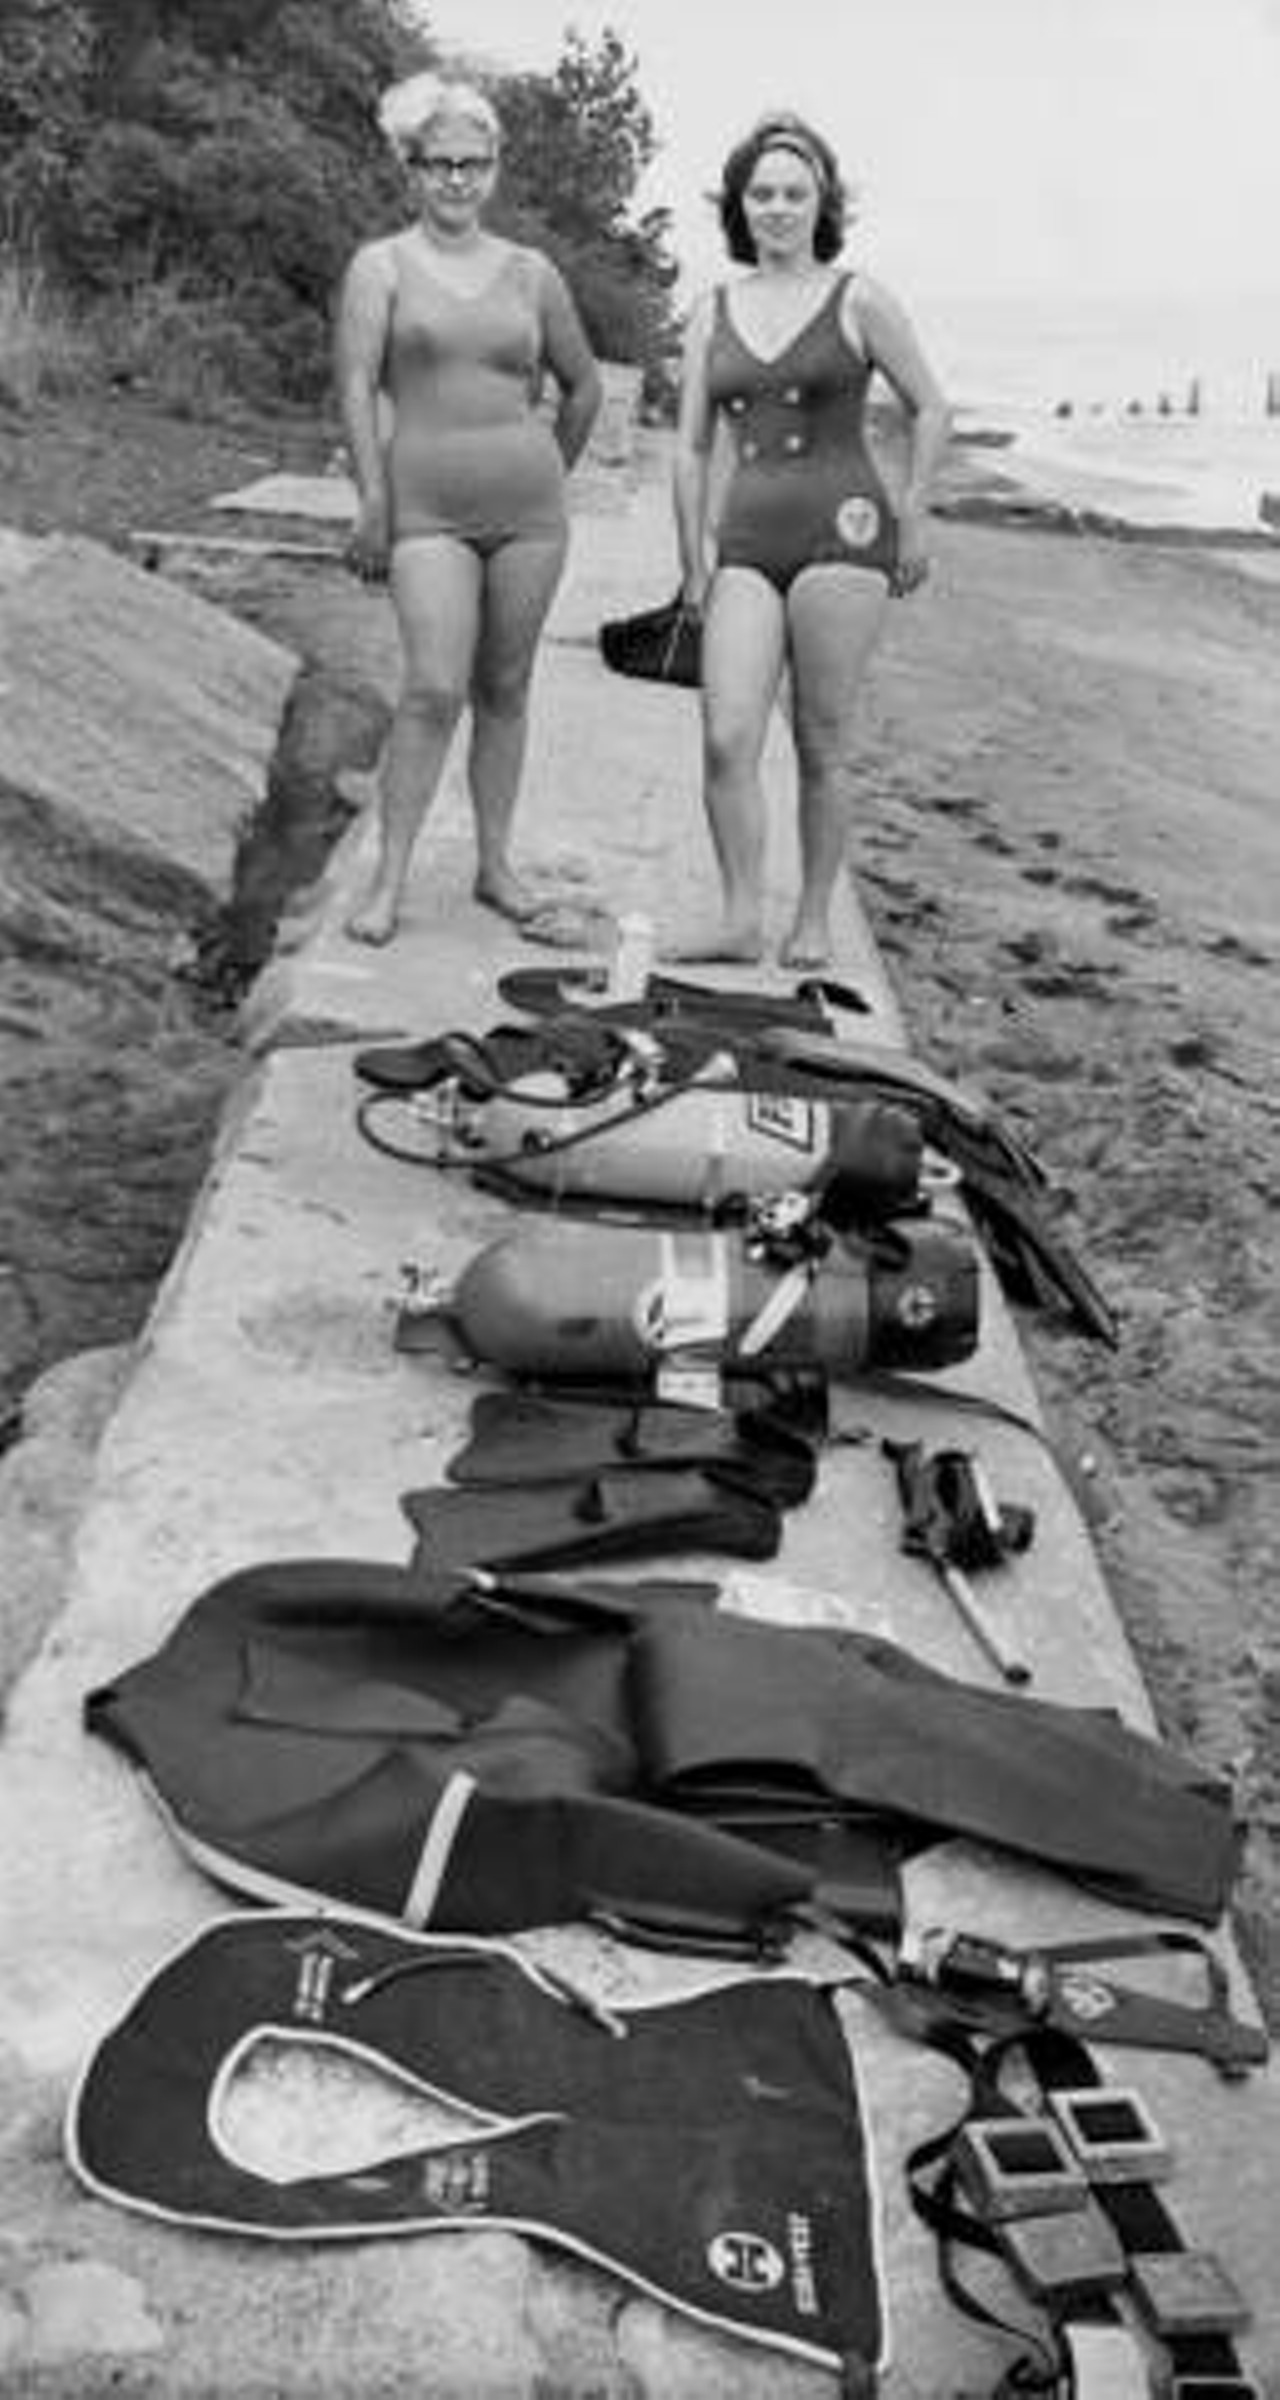 Swimmers with gear, 1963.